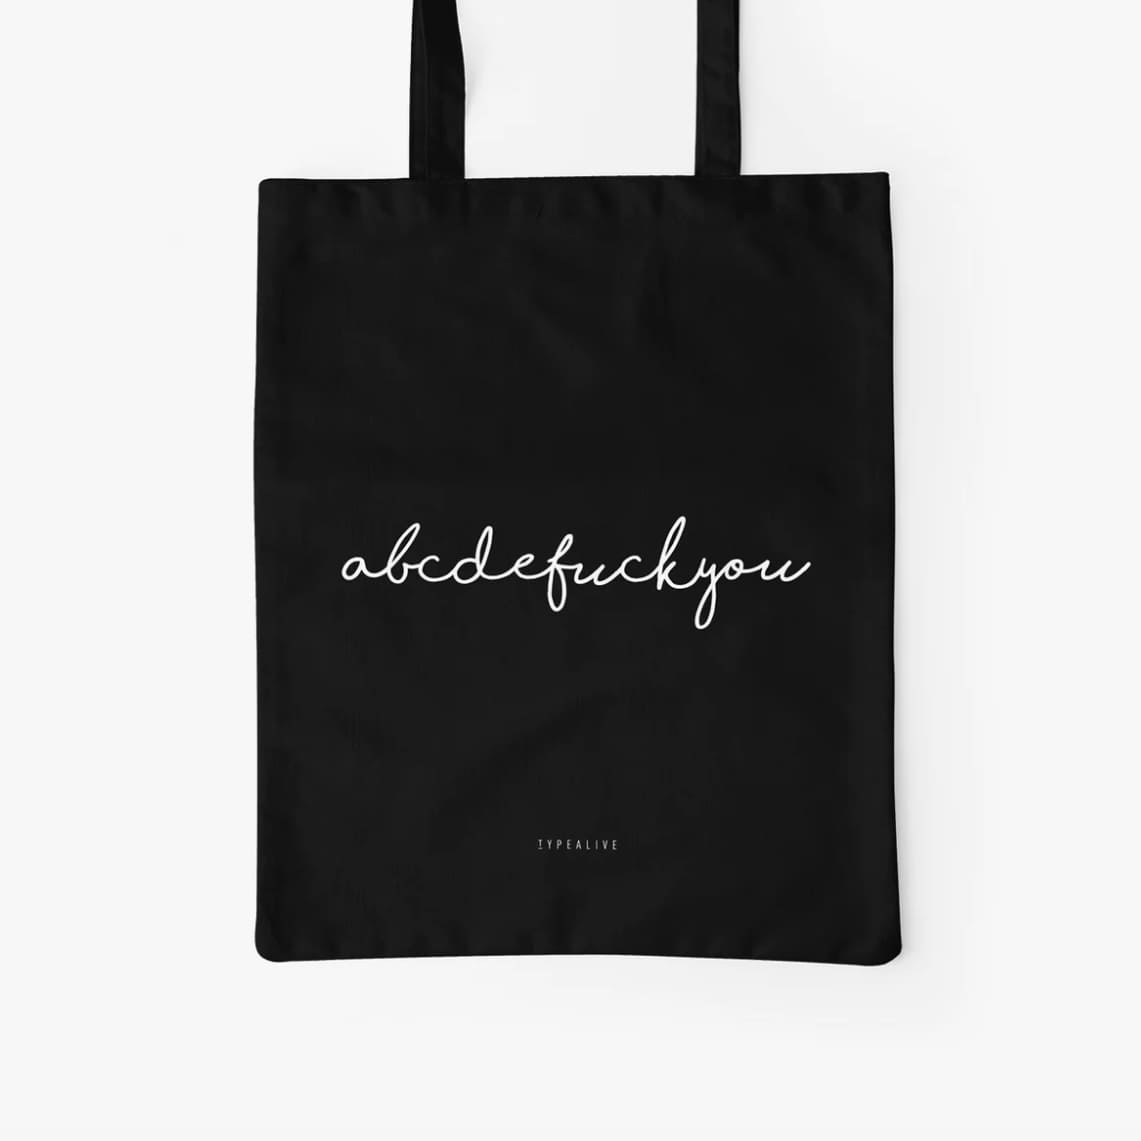 Tote Bag Tasche „abcdefuckyou“, typealive